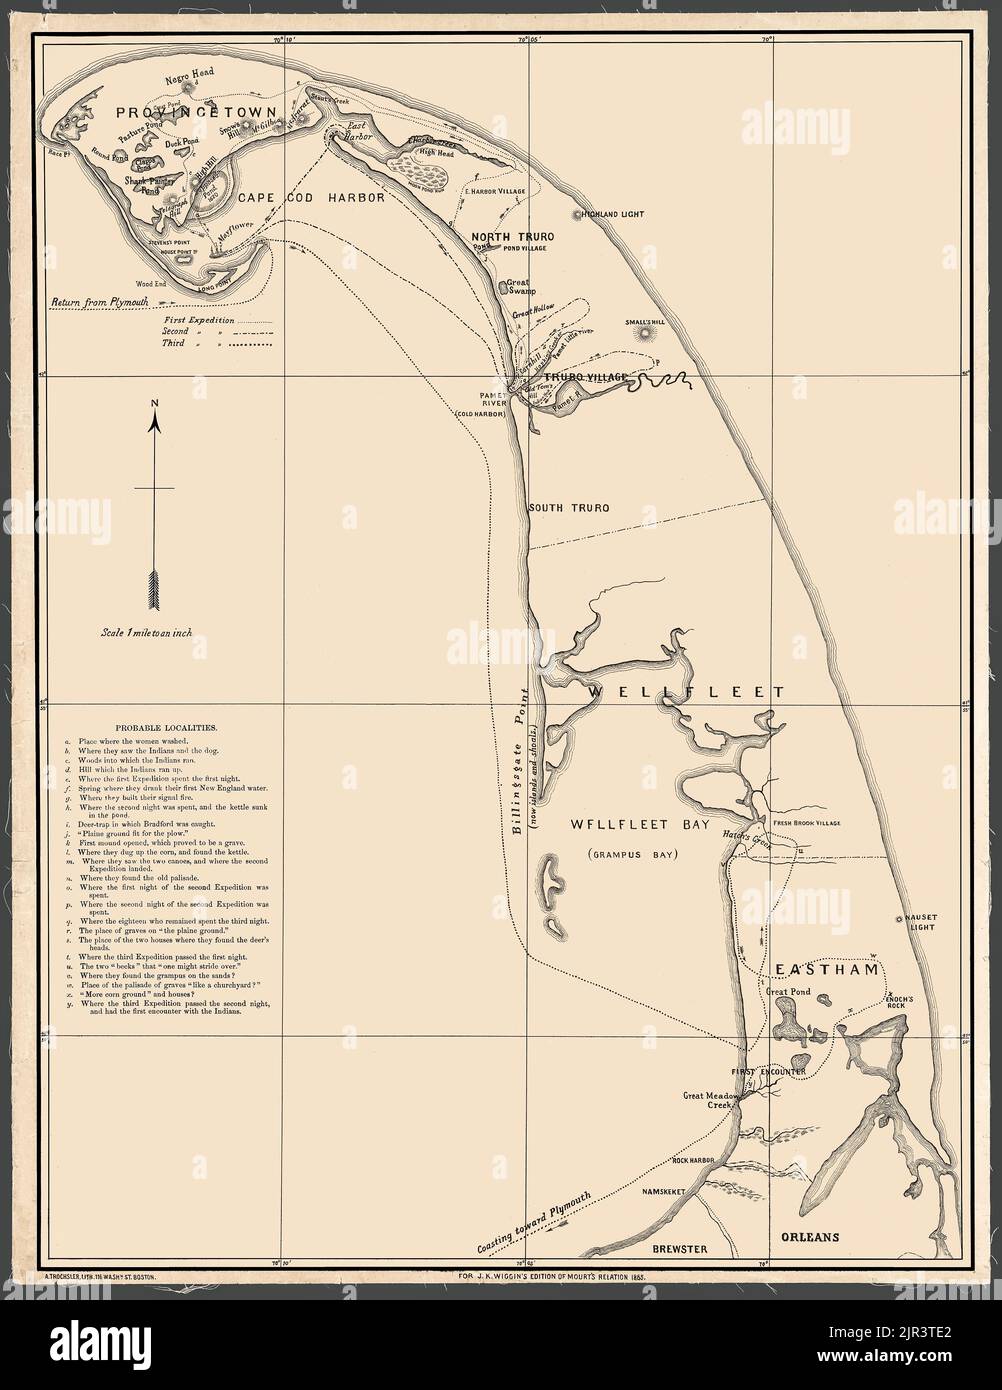 Restored, enhanced, reproduction of a map of Cape Cod form 1865 that was intended to accompany an account of the Mayflower interactions with the indigenous people of the area. Left side of this document is a table labeled 'Probable Localities.' It lists the locations of key events in the account of the Mayflower pilgrims' exploration of Cape Cod. Stock Photo